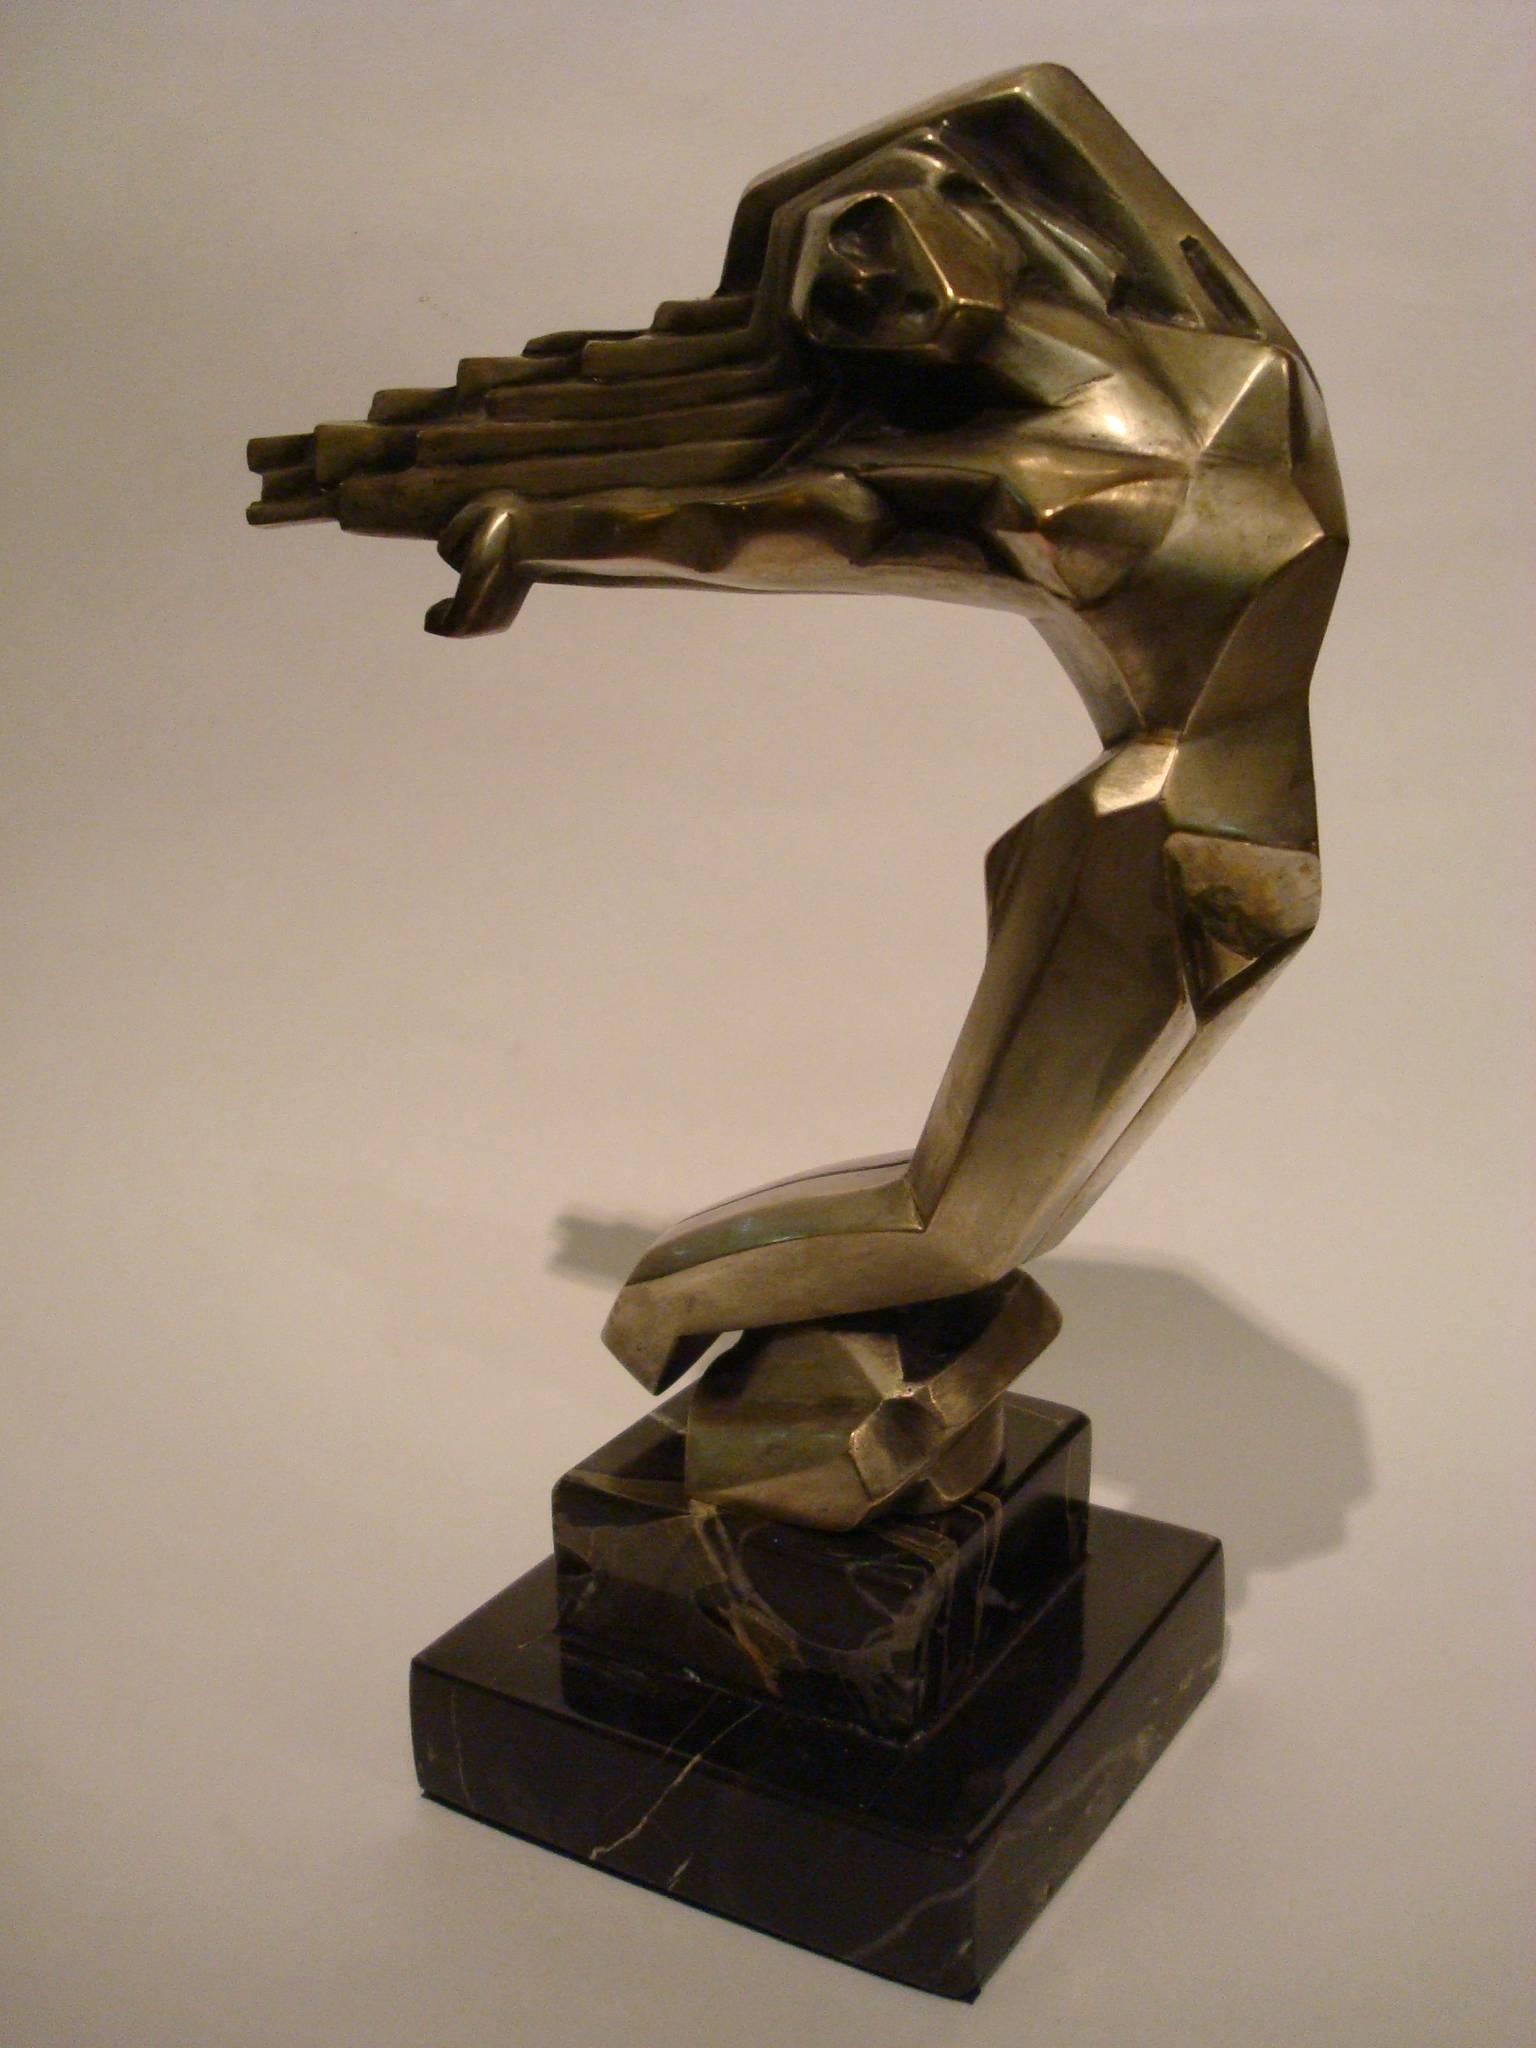 Art Deco Women on wind Car Mascot, hood ornament, France, 1930, D.I.M. Cubist.
Silver plated bronze mounted over a Portoro marble base.

Mascottes passion by Michel Legrand.
Fig 25: Cheveaux Au Vent - Stylise Art Deco.
This piece is typical of